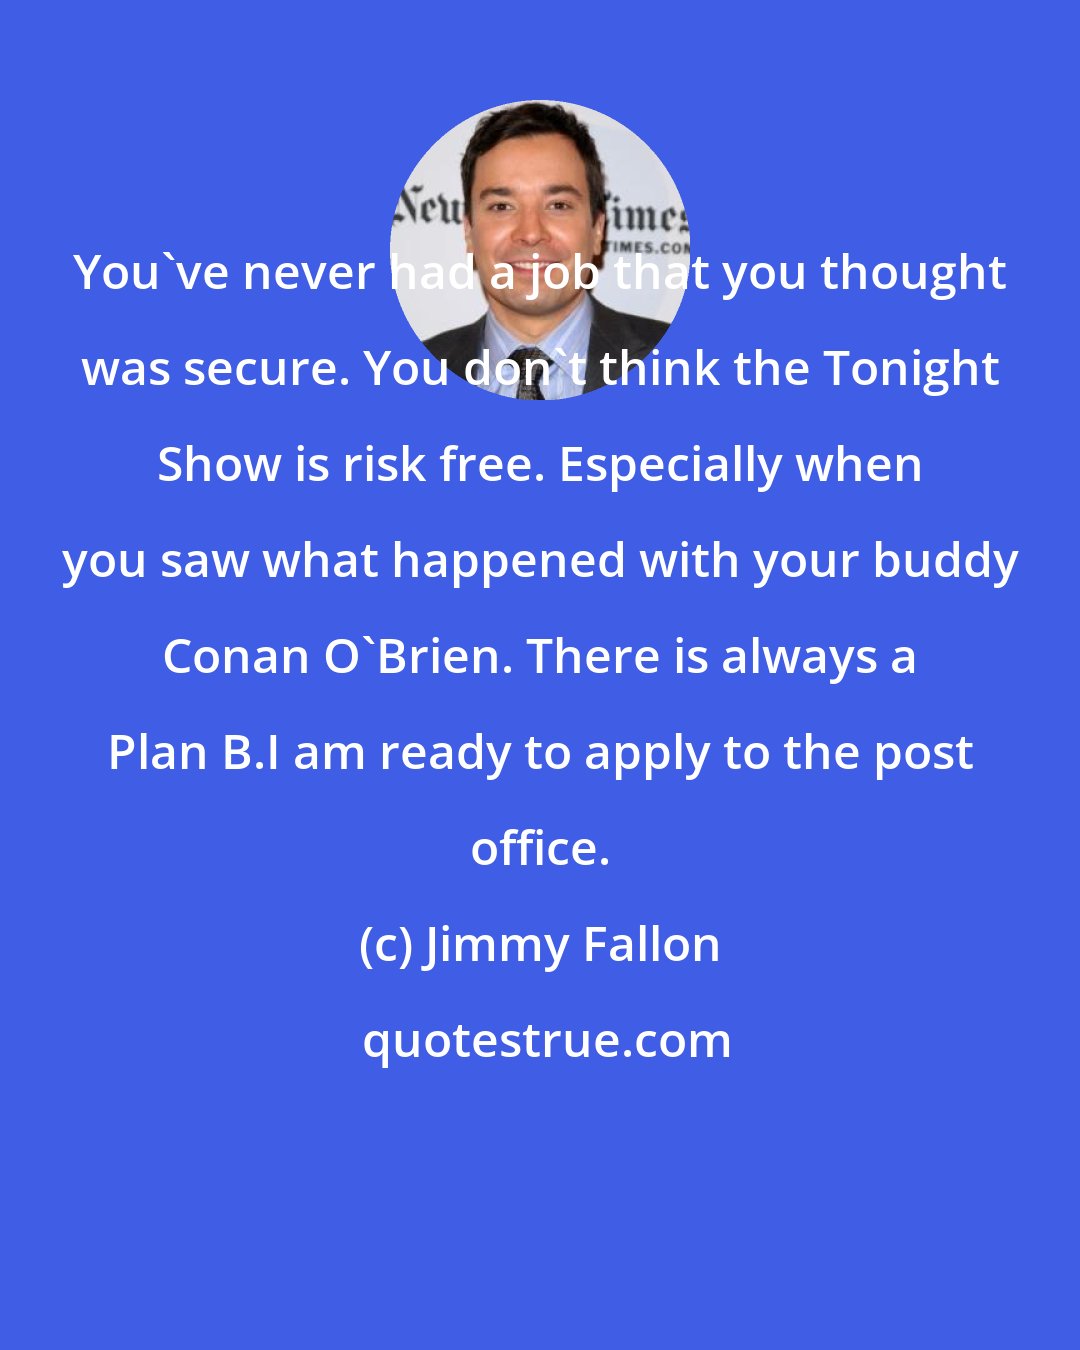 Jimmy Fallon: You've never had a job that you thought was secure. You don't think the Tonight Show is risk free. Especially when you saw what happened with your buddy Conan O'Brien. There is always a Plan B.I am ready to apply to the post office.